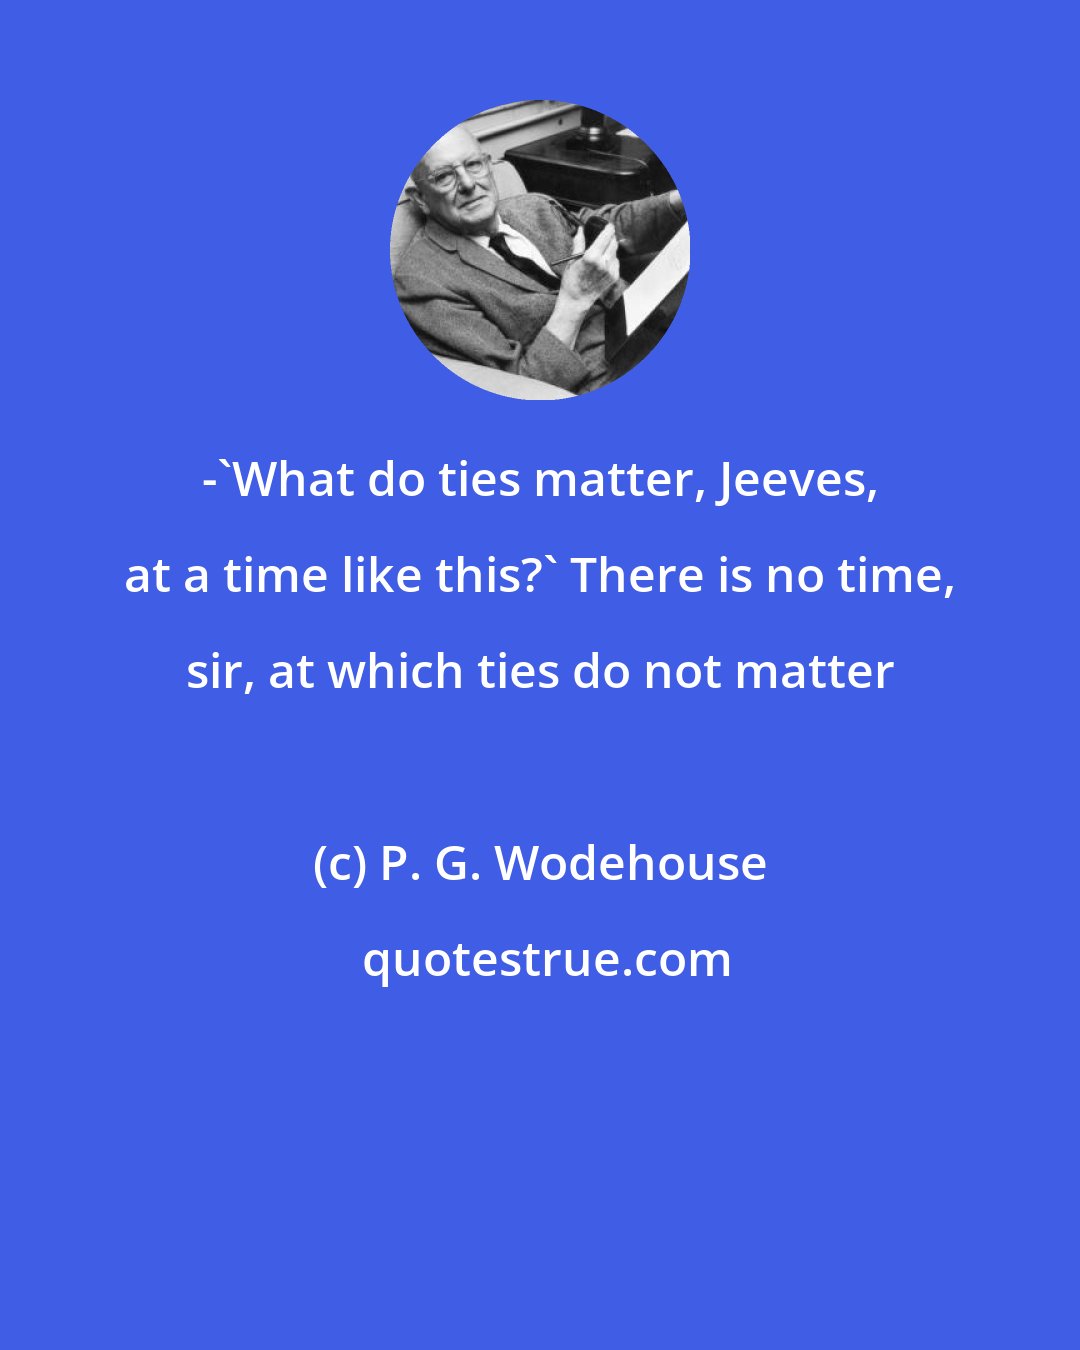 P. G. Wodehouse: -'What do ties matter, Jeeves, at a time like this?' There is no time, sir, at which ties do not matter